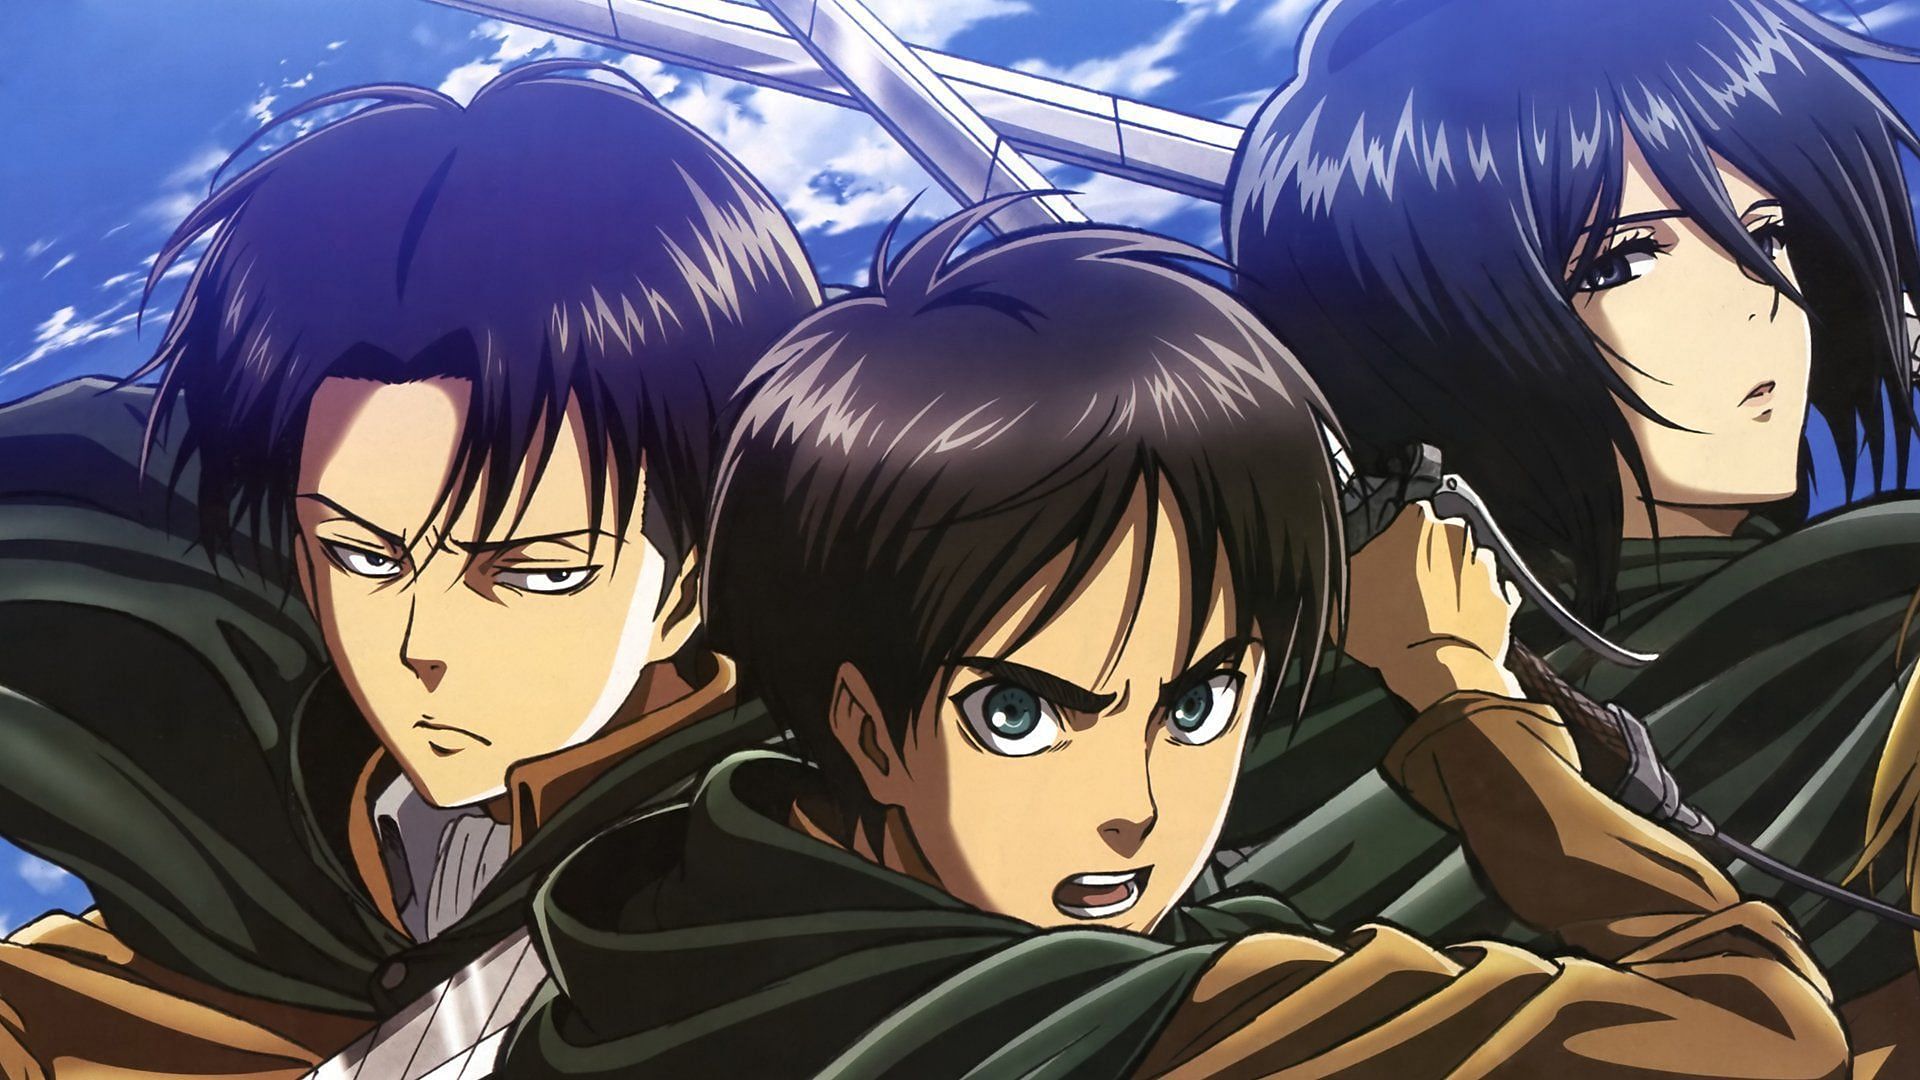 Mikasa Ackerman is another Attack on Titan character that may come to the video game (Image via Wallpaper Up)